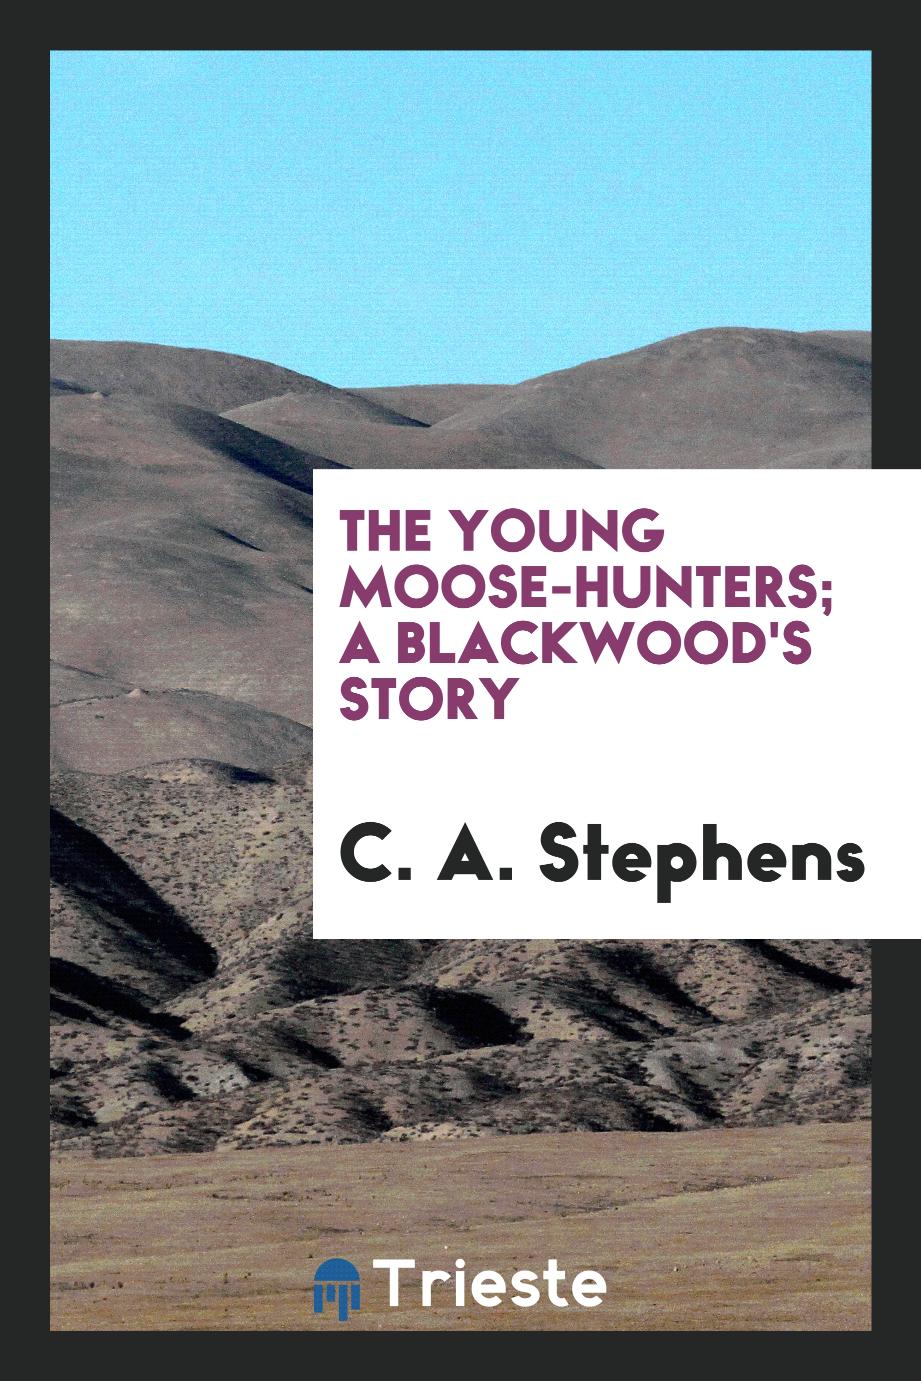 The young moose-hunters; a blackwood's story